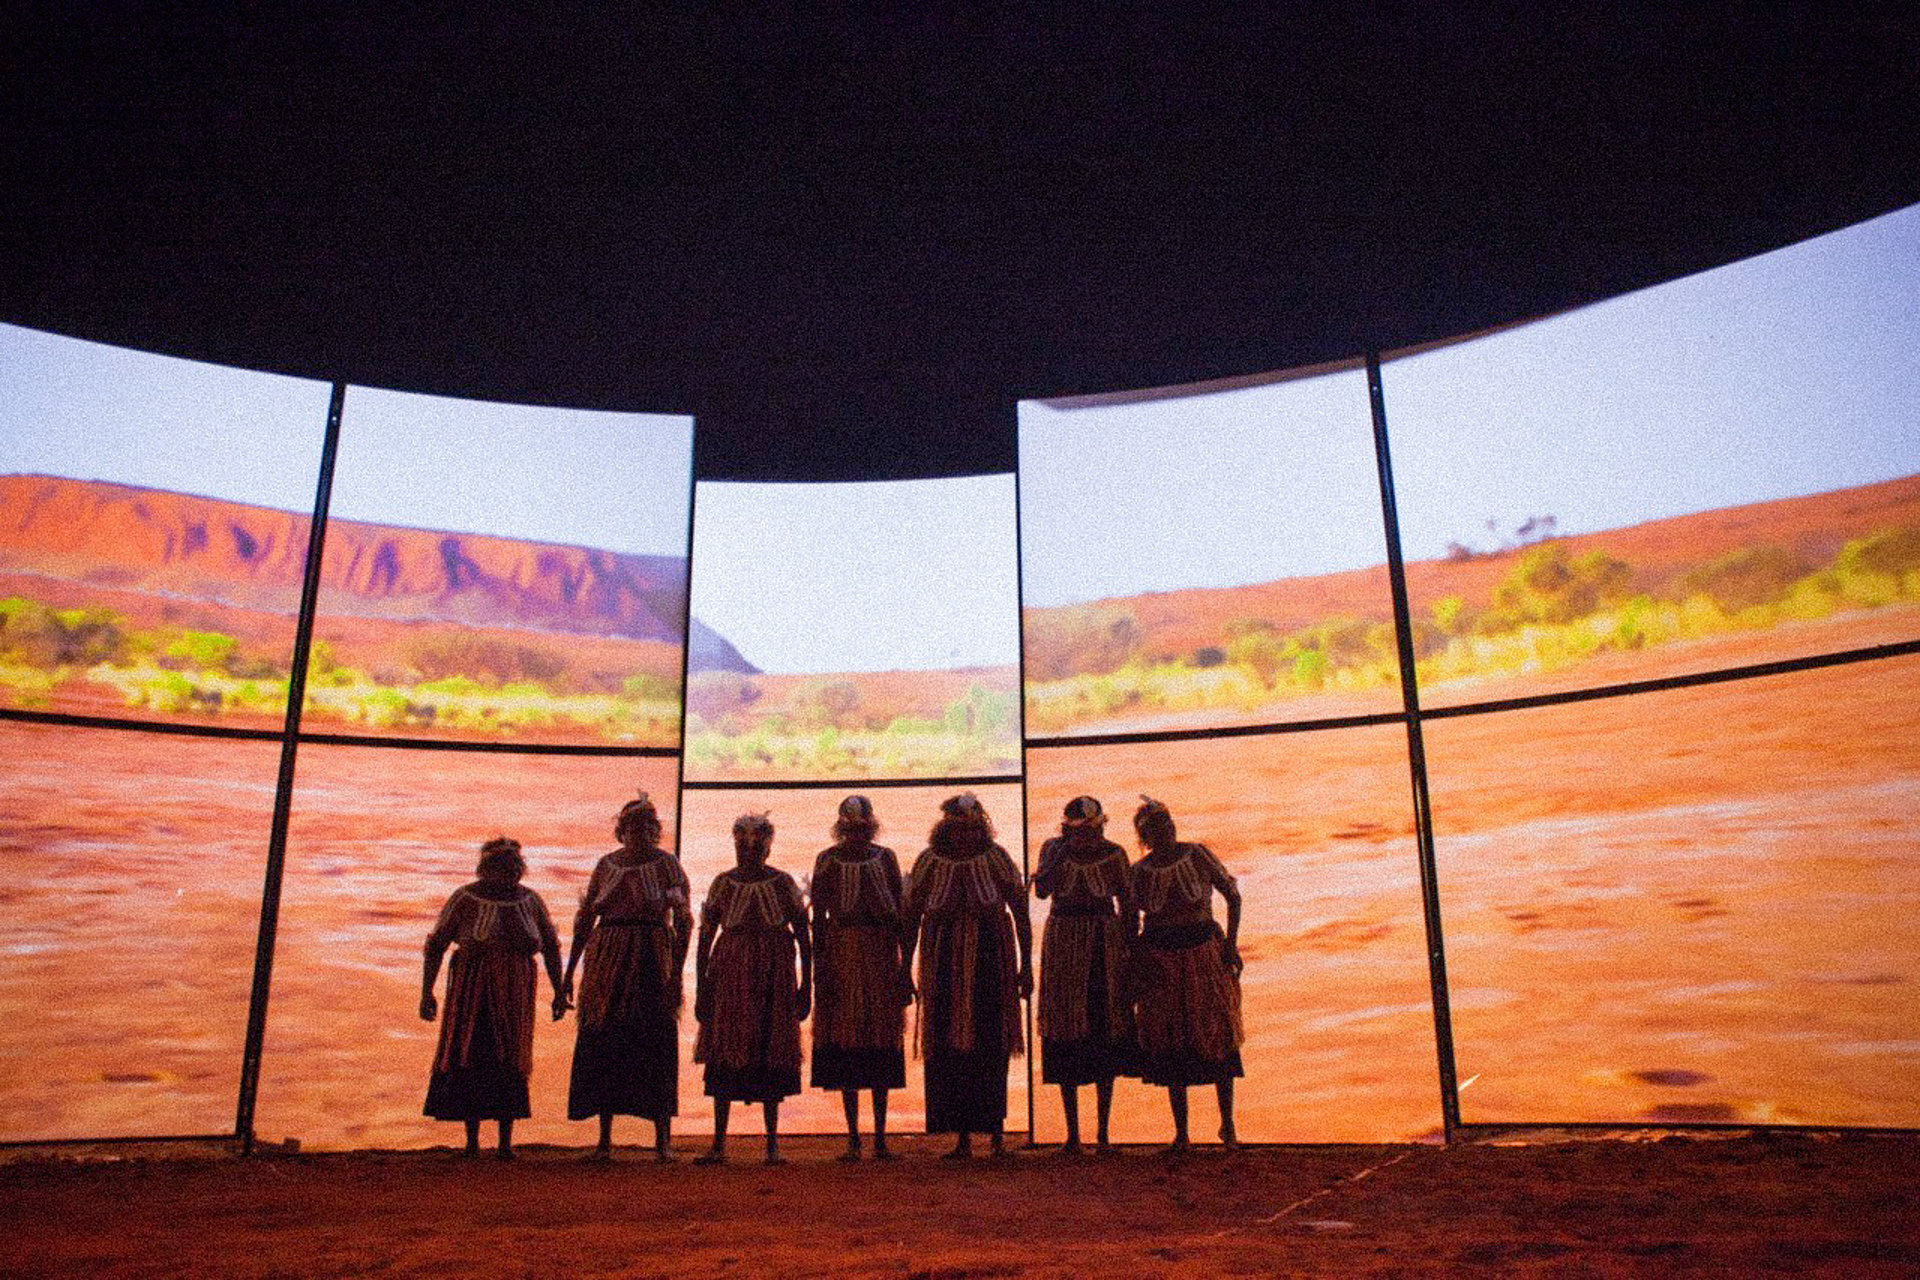 The seven sisters in front of a large screen, showing the dessert of Australia 